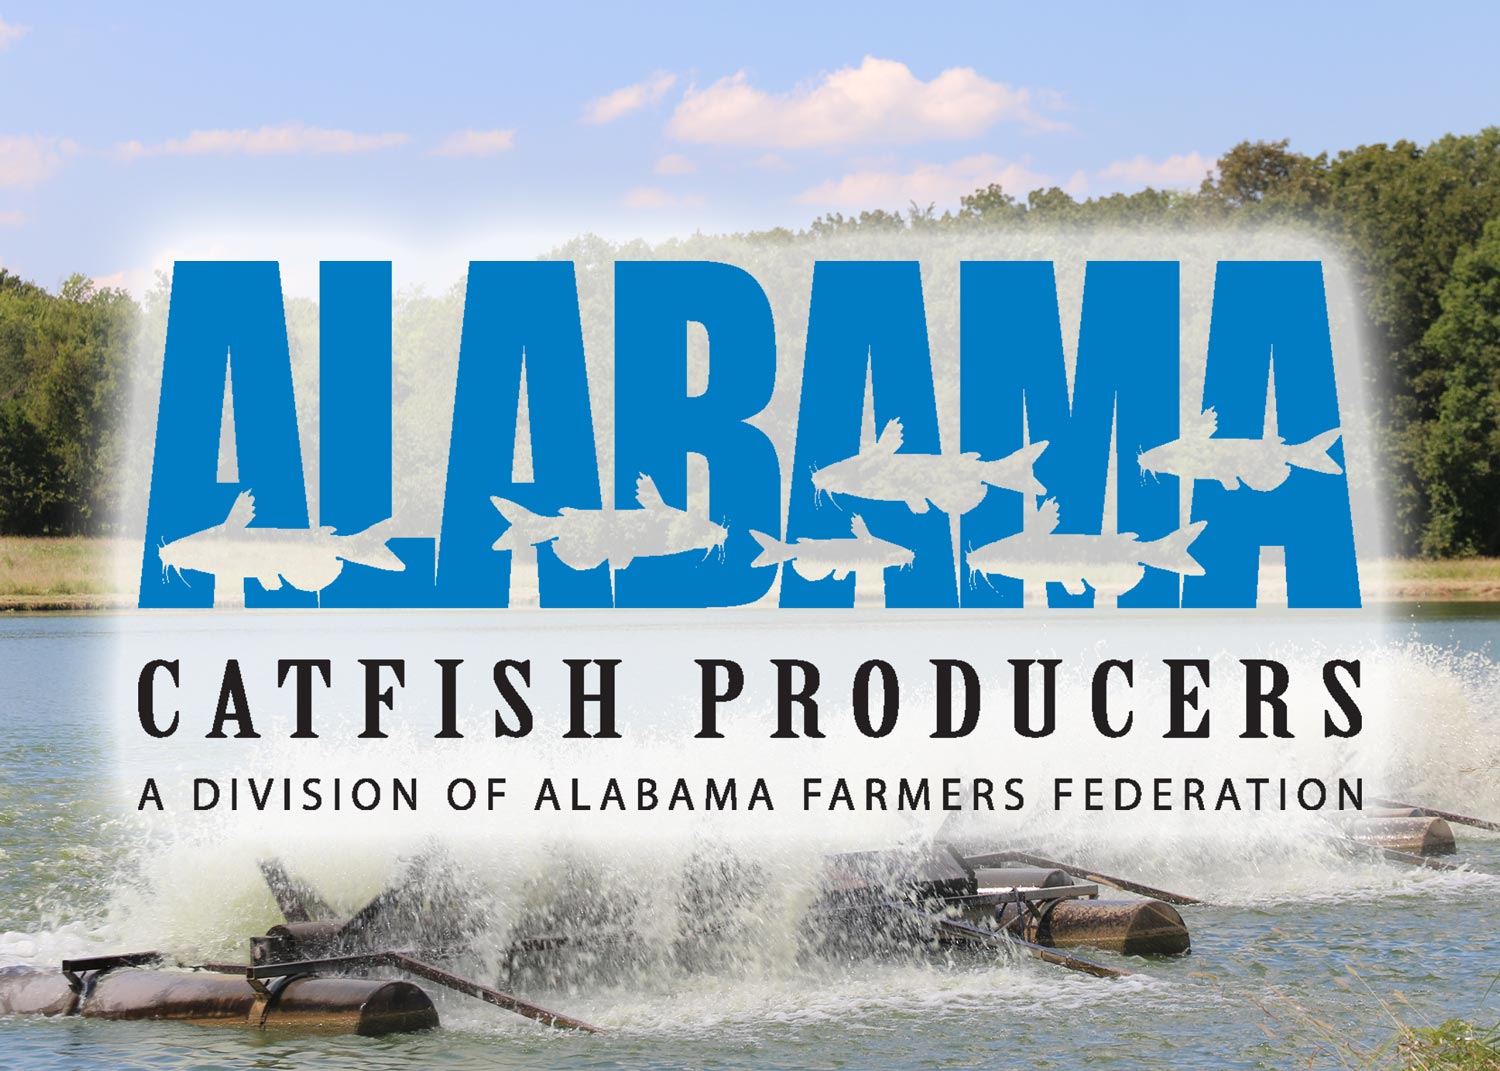 The Catfish Industry of Alabama is not a well-known fact outside of the state’s Black Belt region, but it is a thriving and interesting industry.